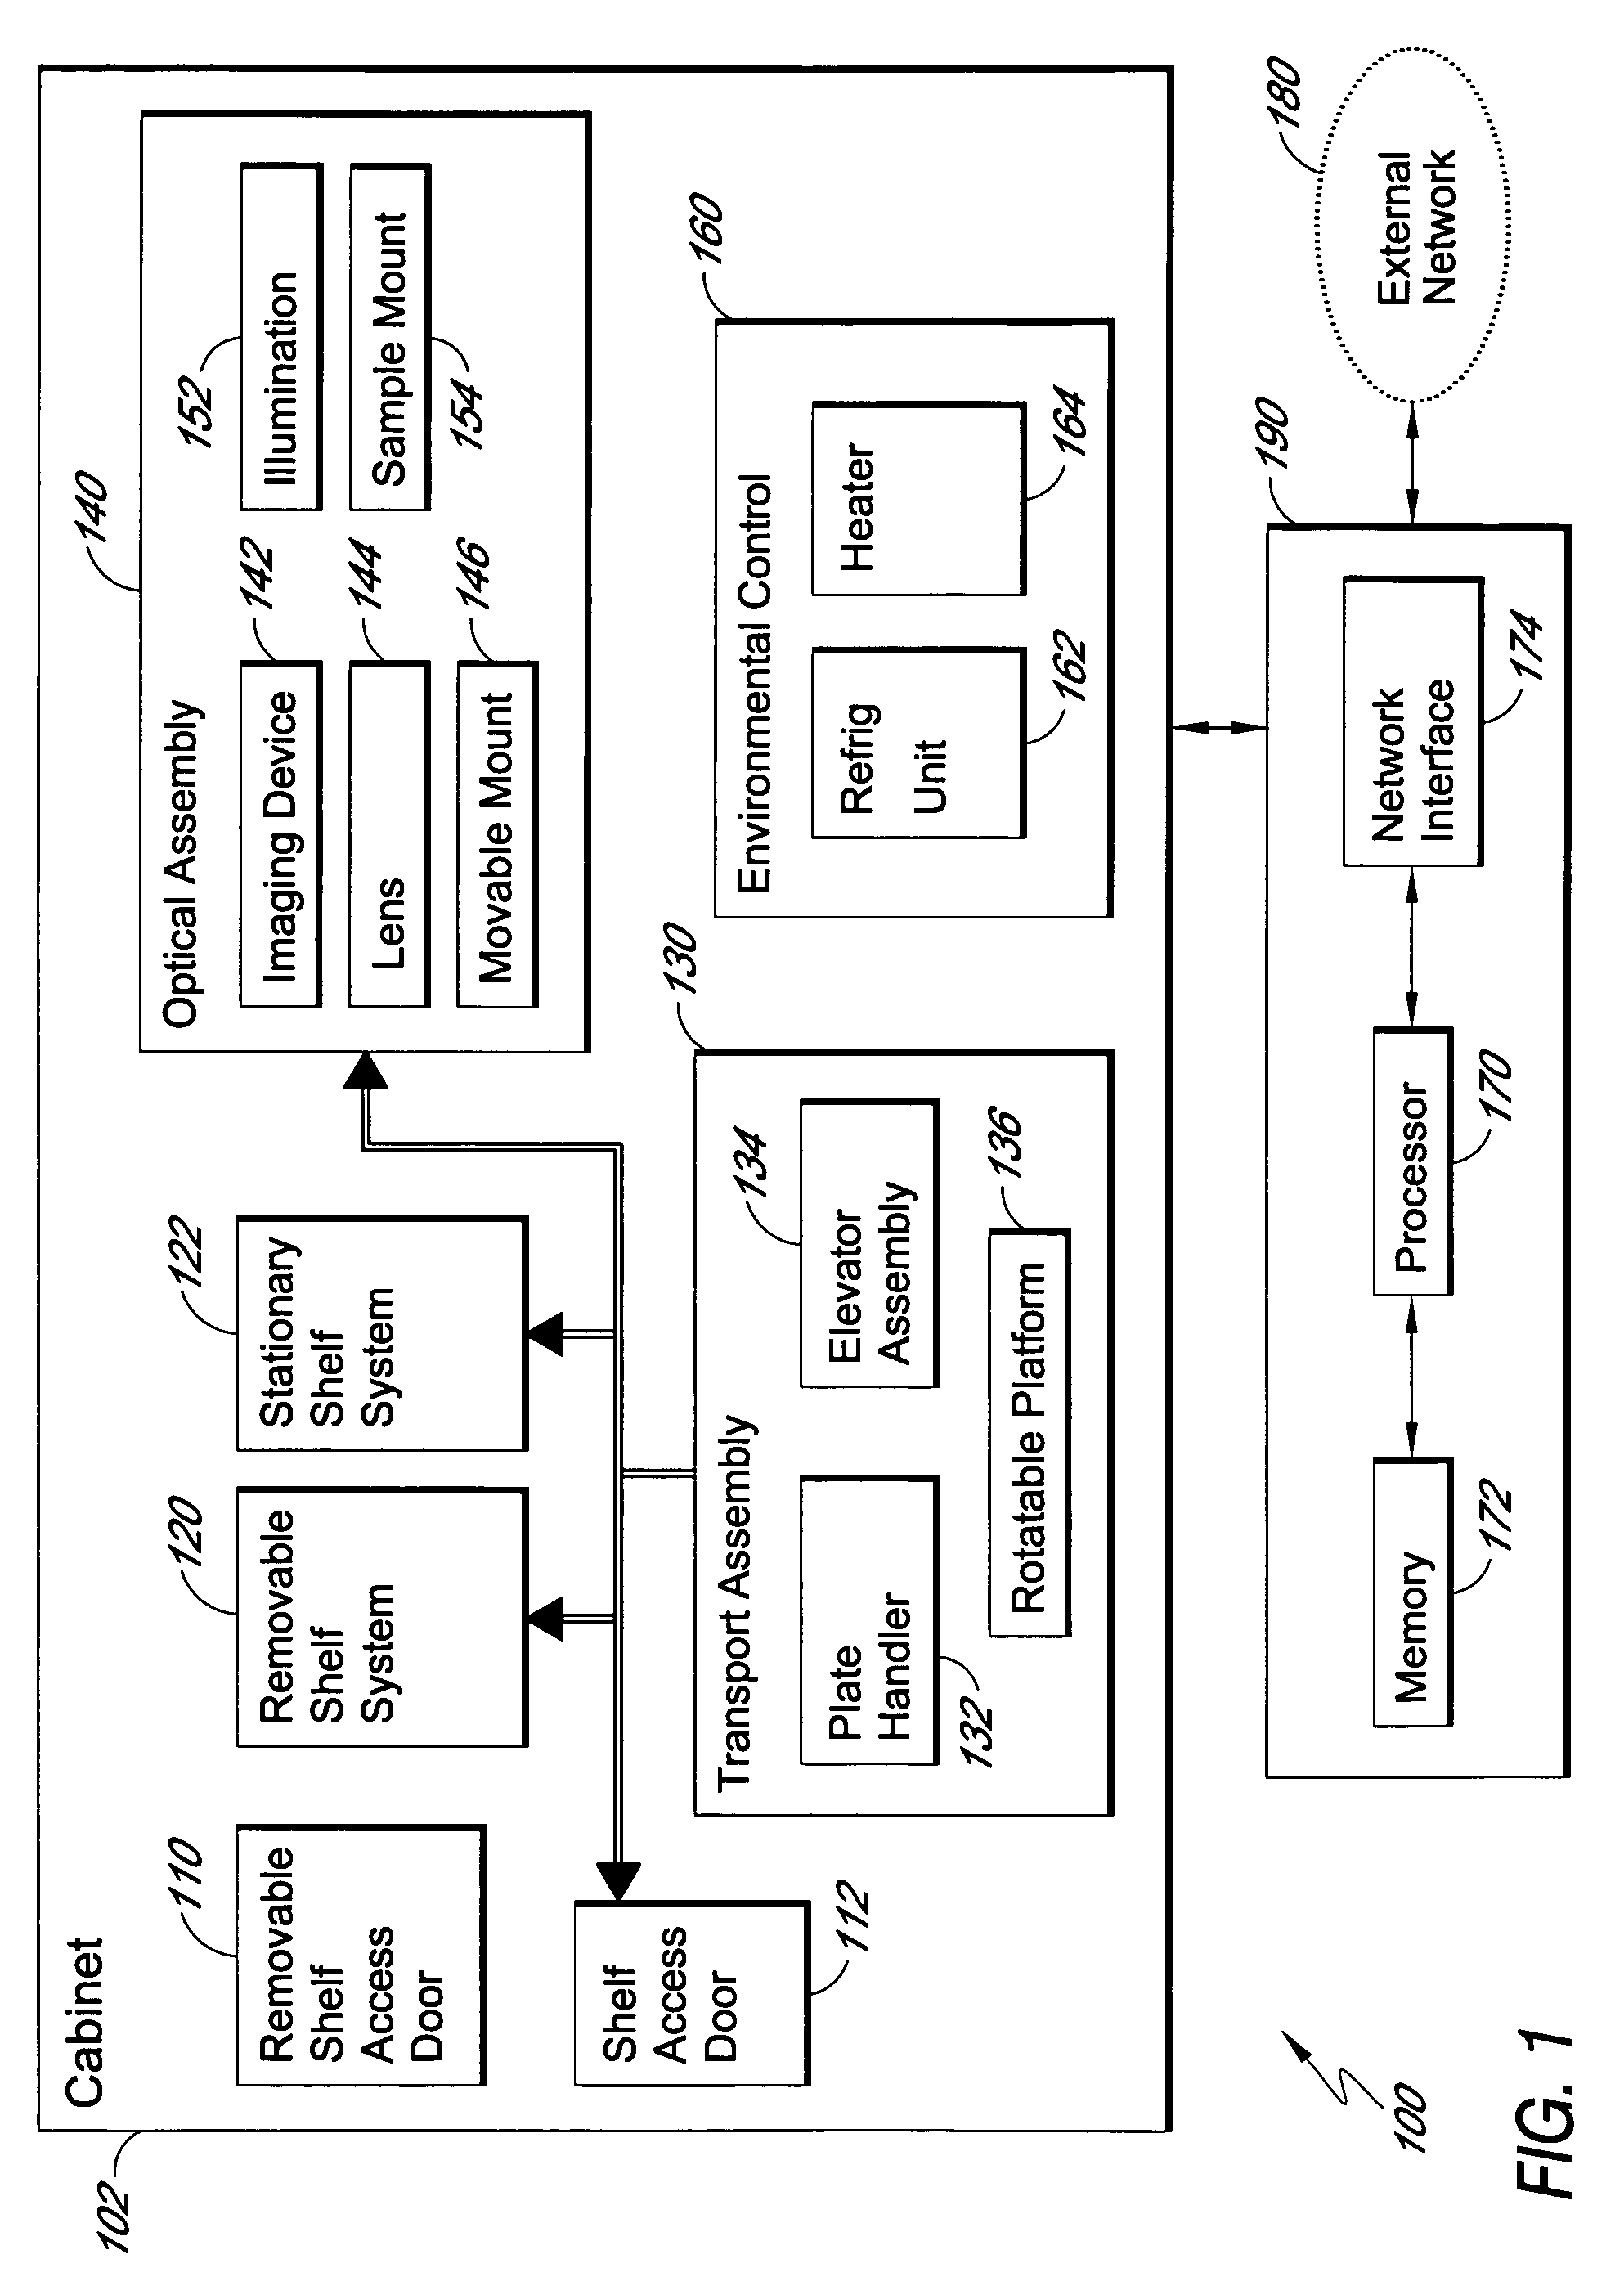 Automated sample analysis system and method